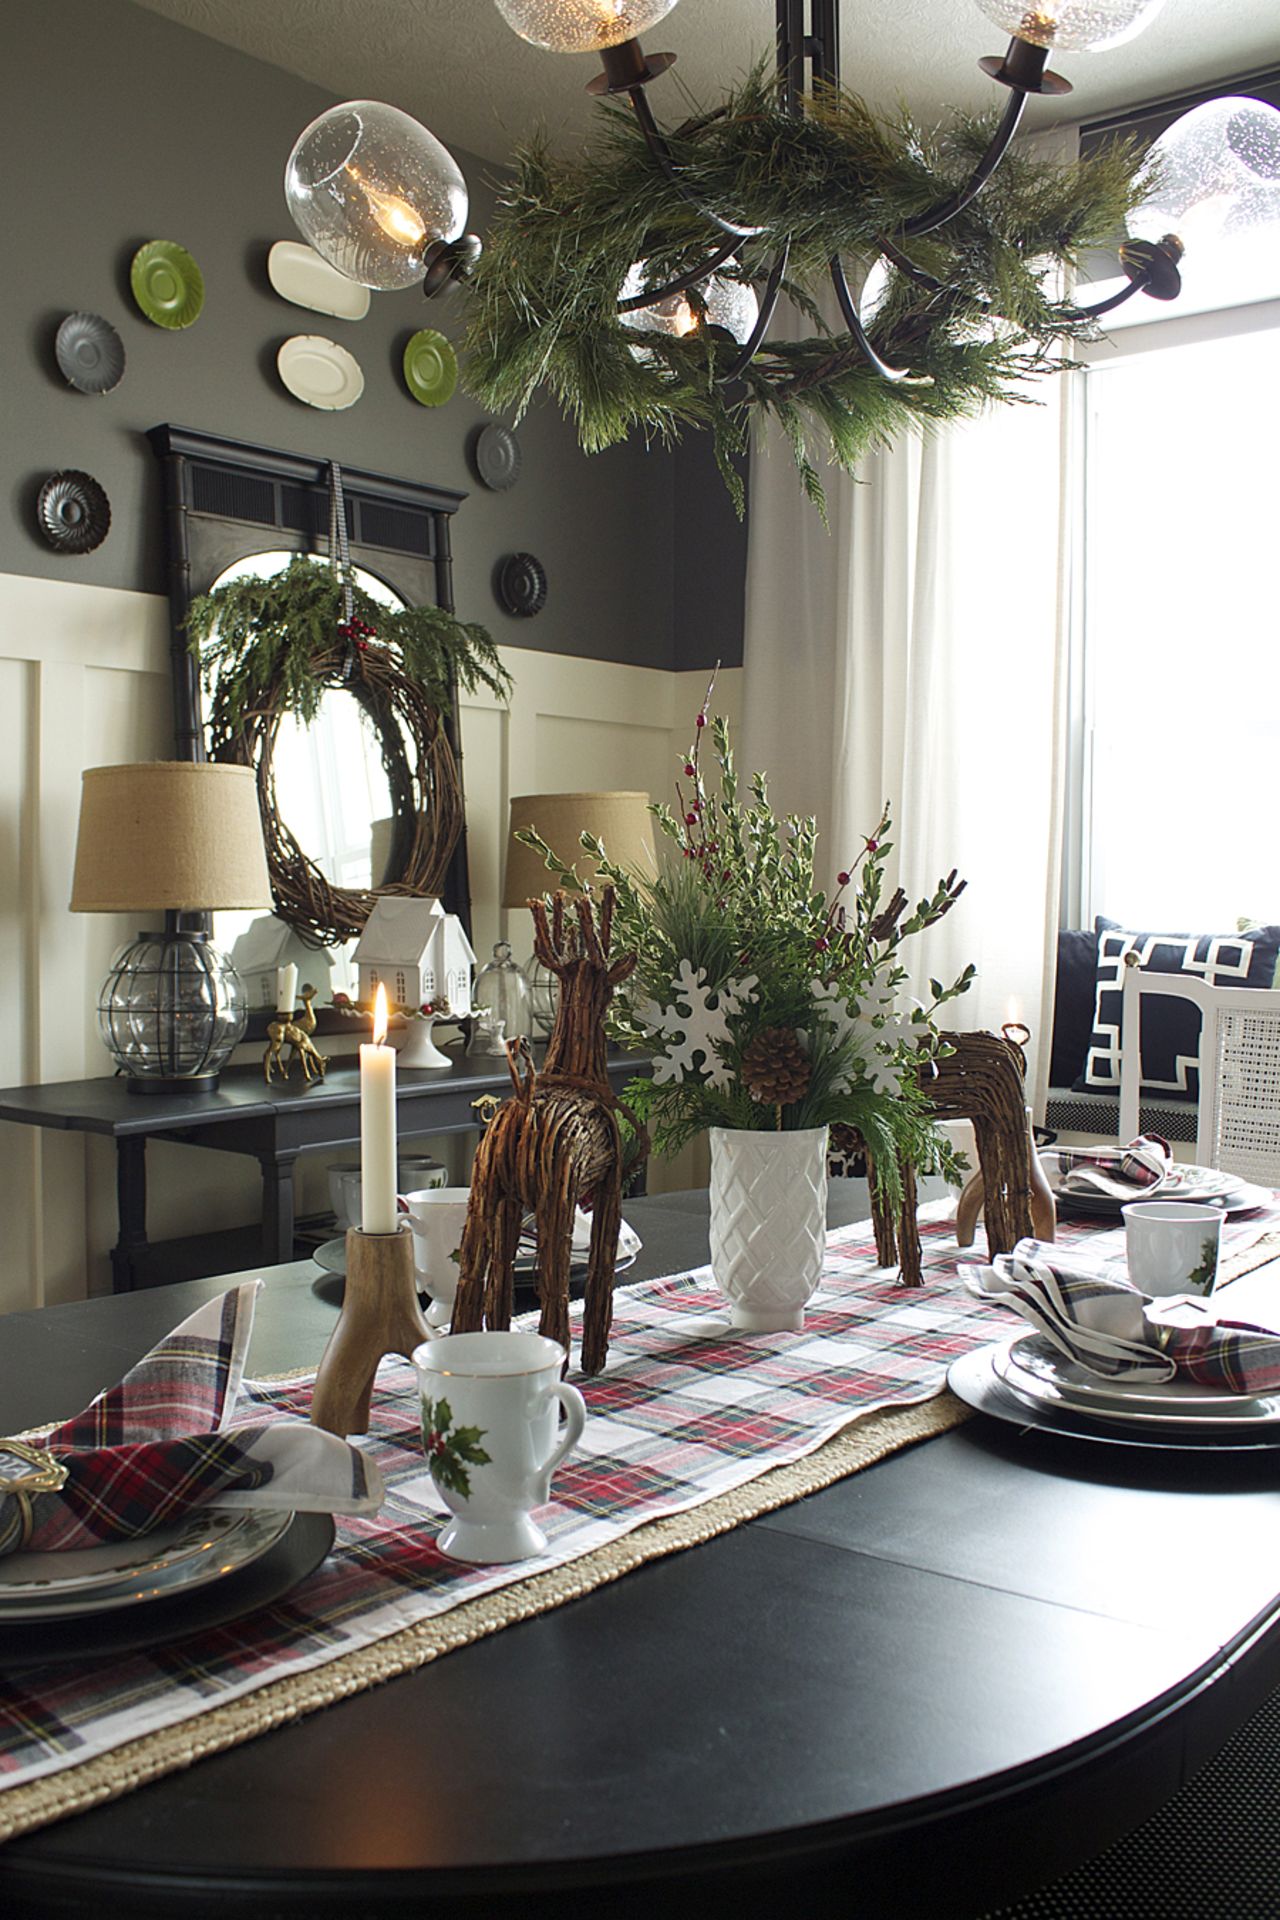 Jones' dining room includes deer figurines made of vine and a vine wreath with sprays of cut greens.